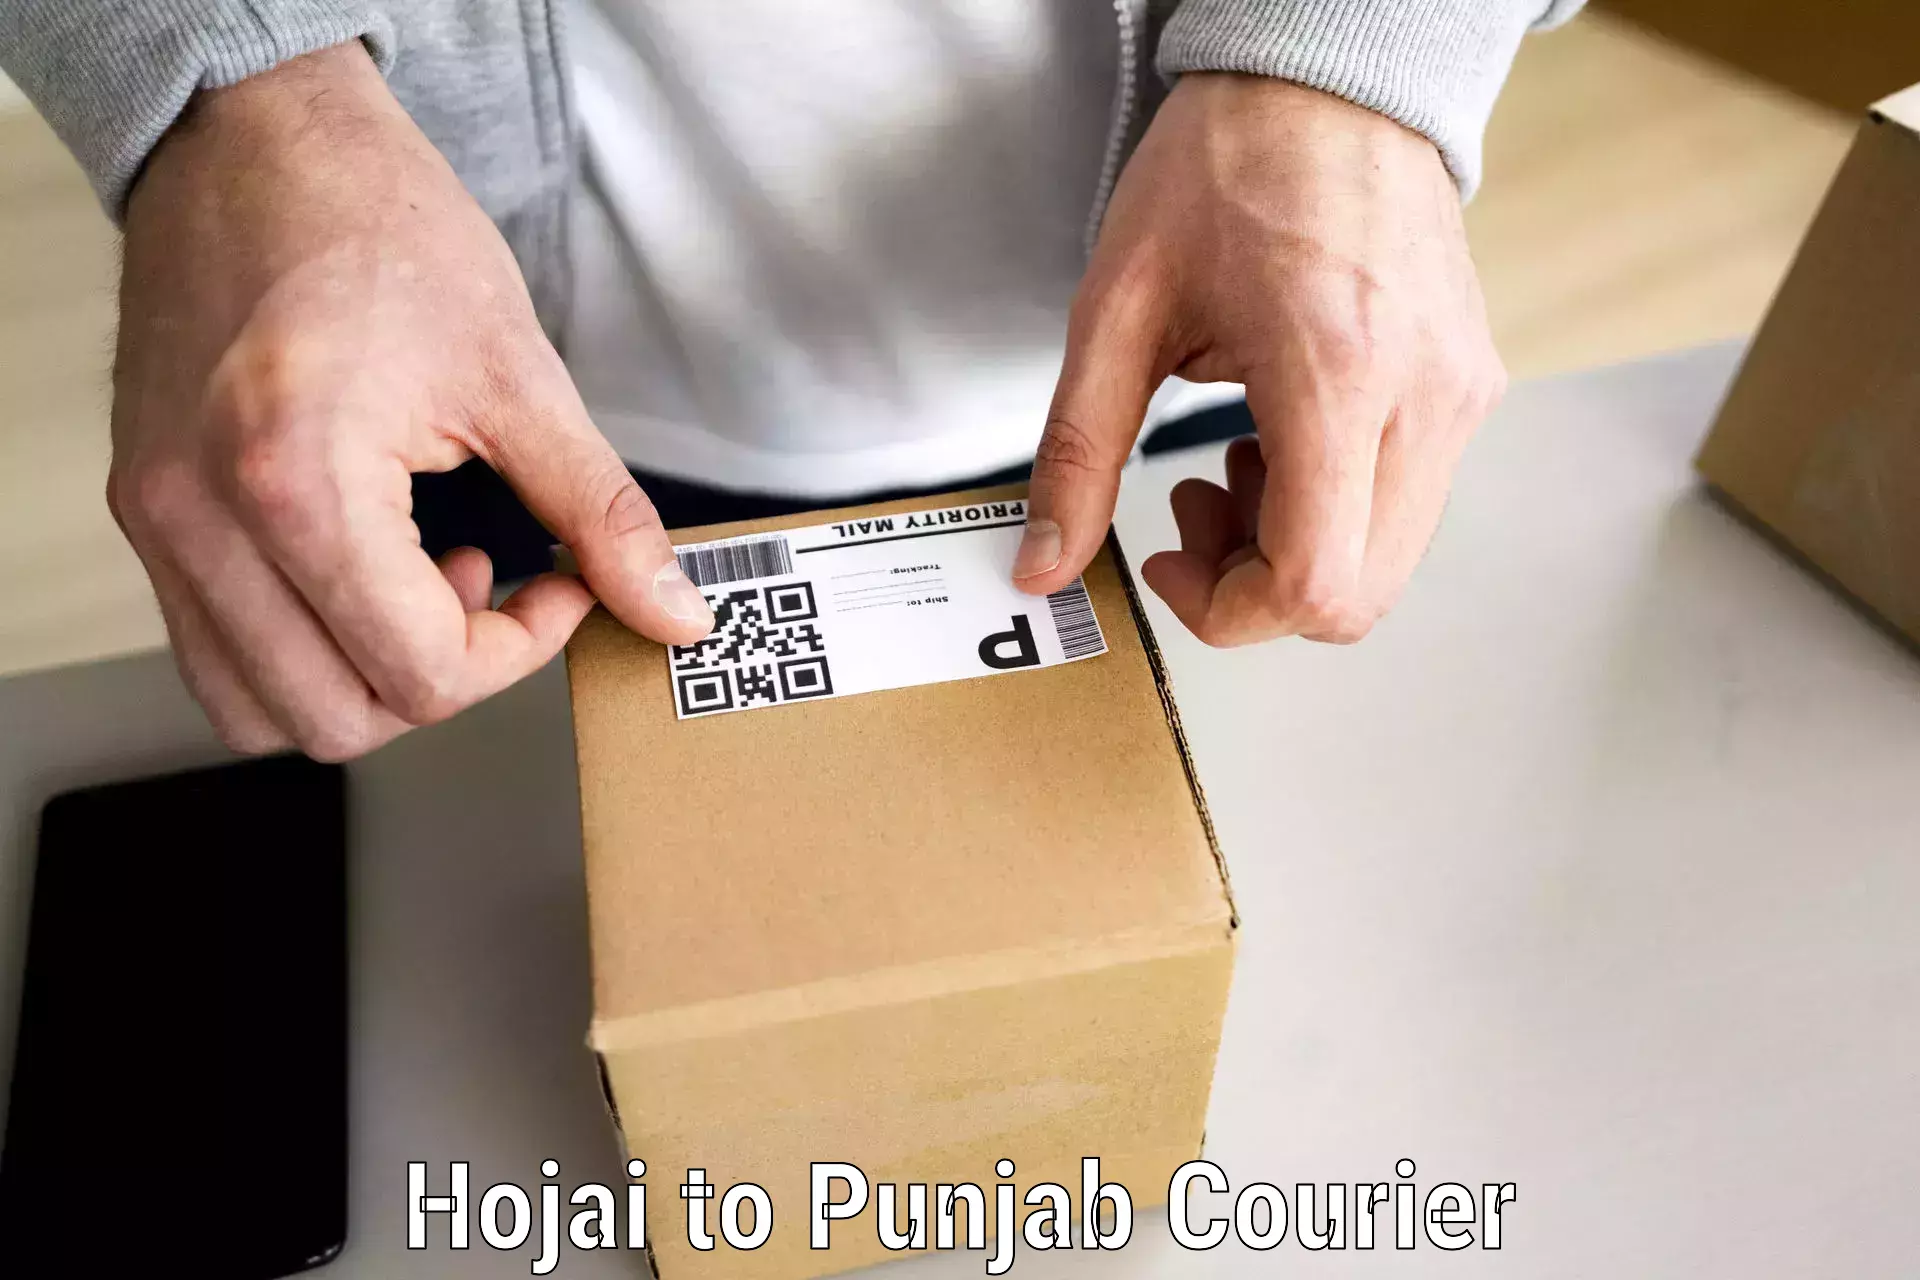 Home moving specialists Hojai to Punjab